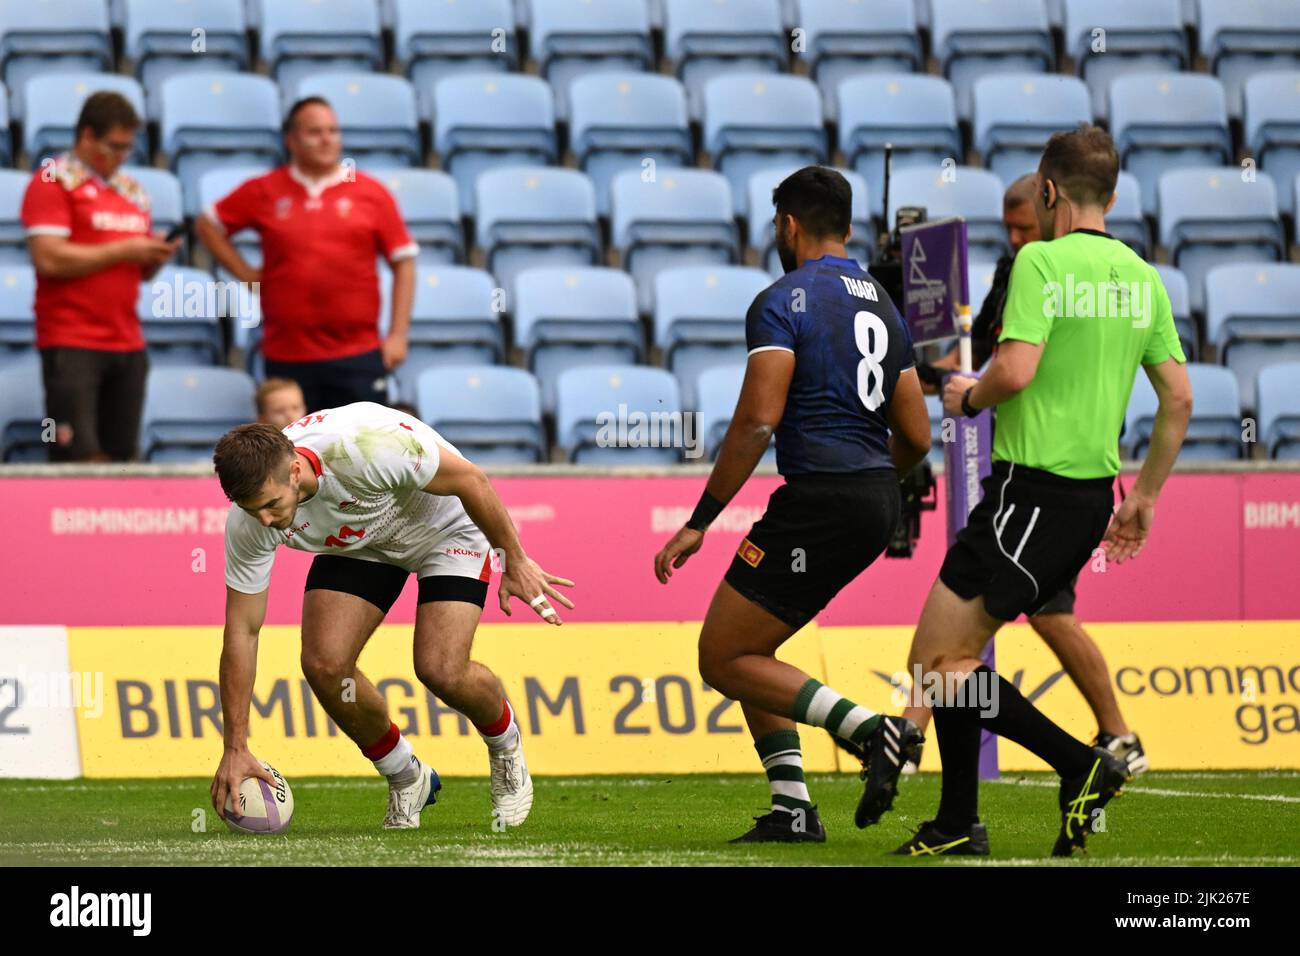 Charlton Kerr of England scores a try against Sri Lanka during the Rugby Sevens at the Commonwealth Games at Coventry Stadium on Friday 29th July 2022. Credit: MI News & Sport /Alamy Live News Stock Photo